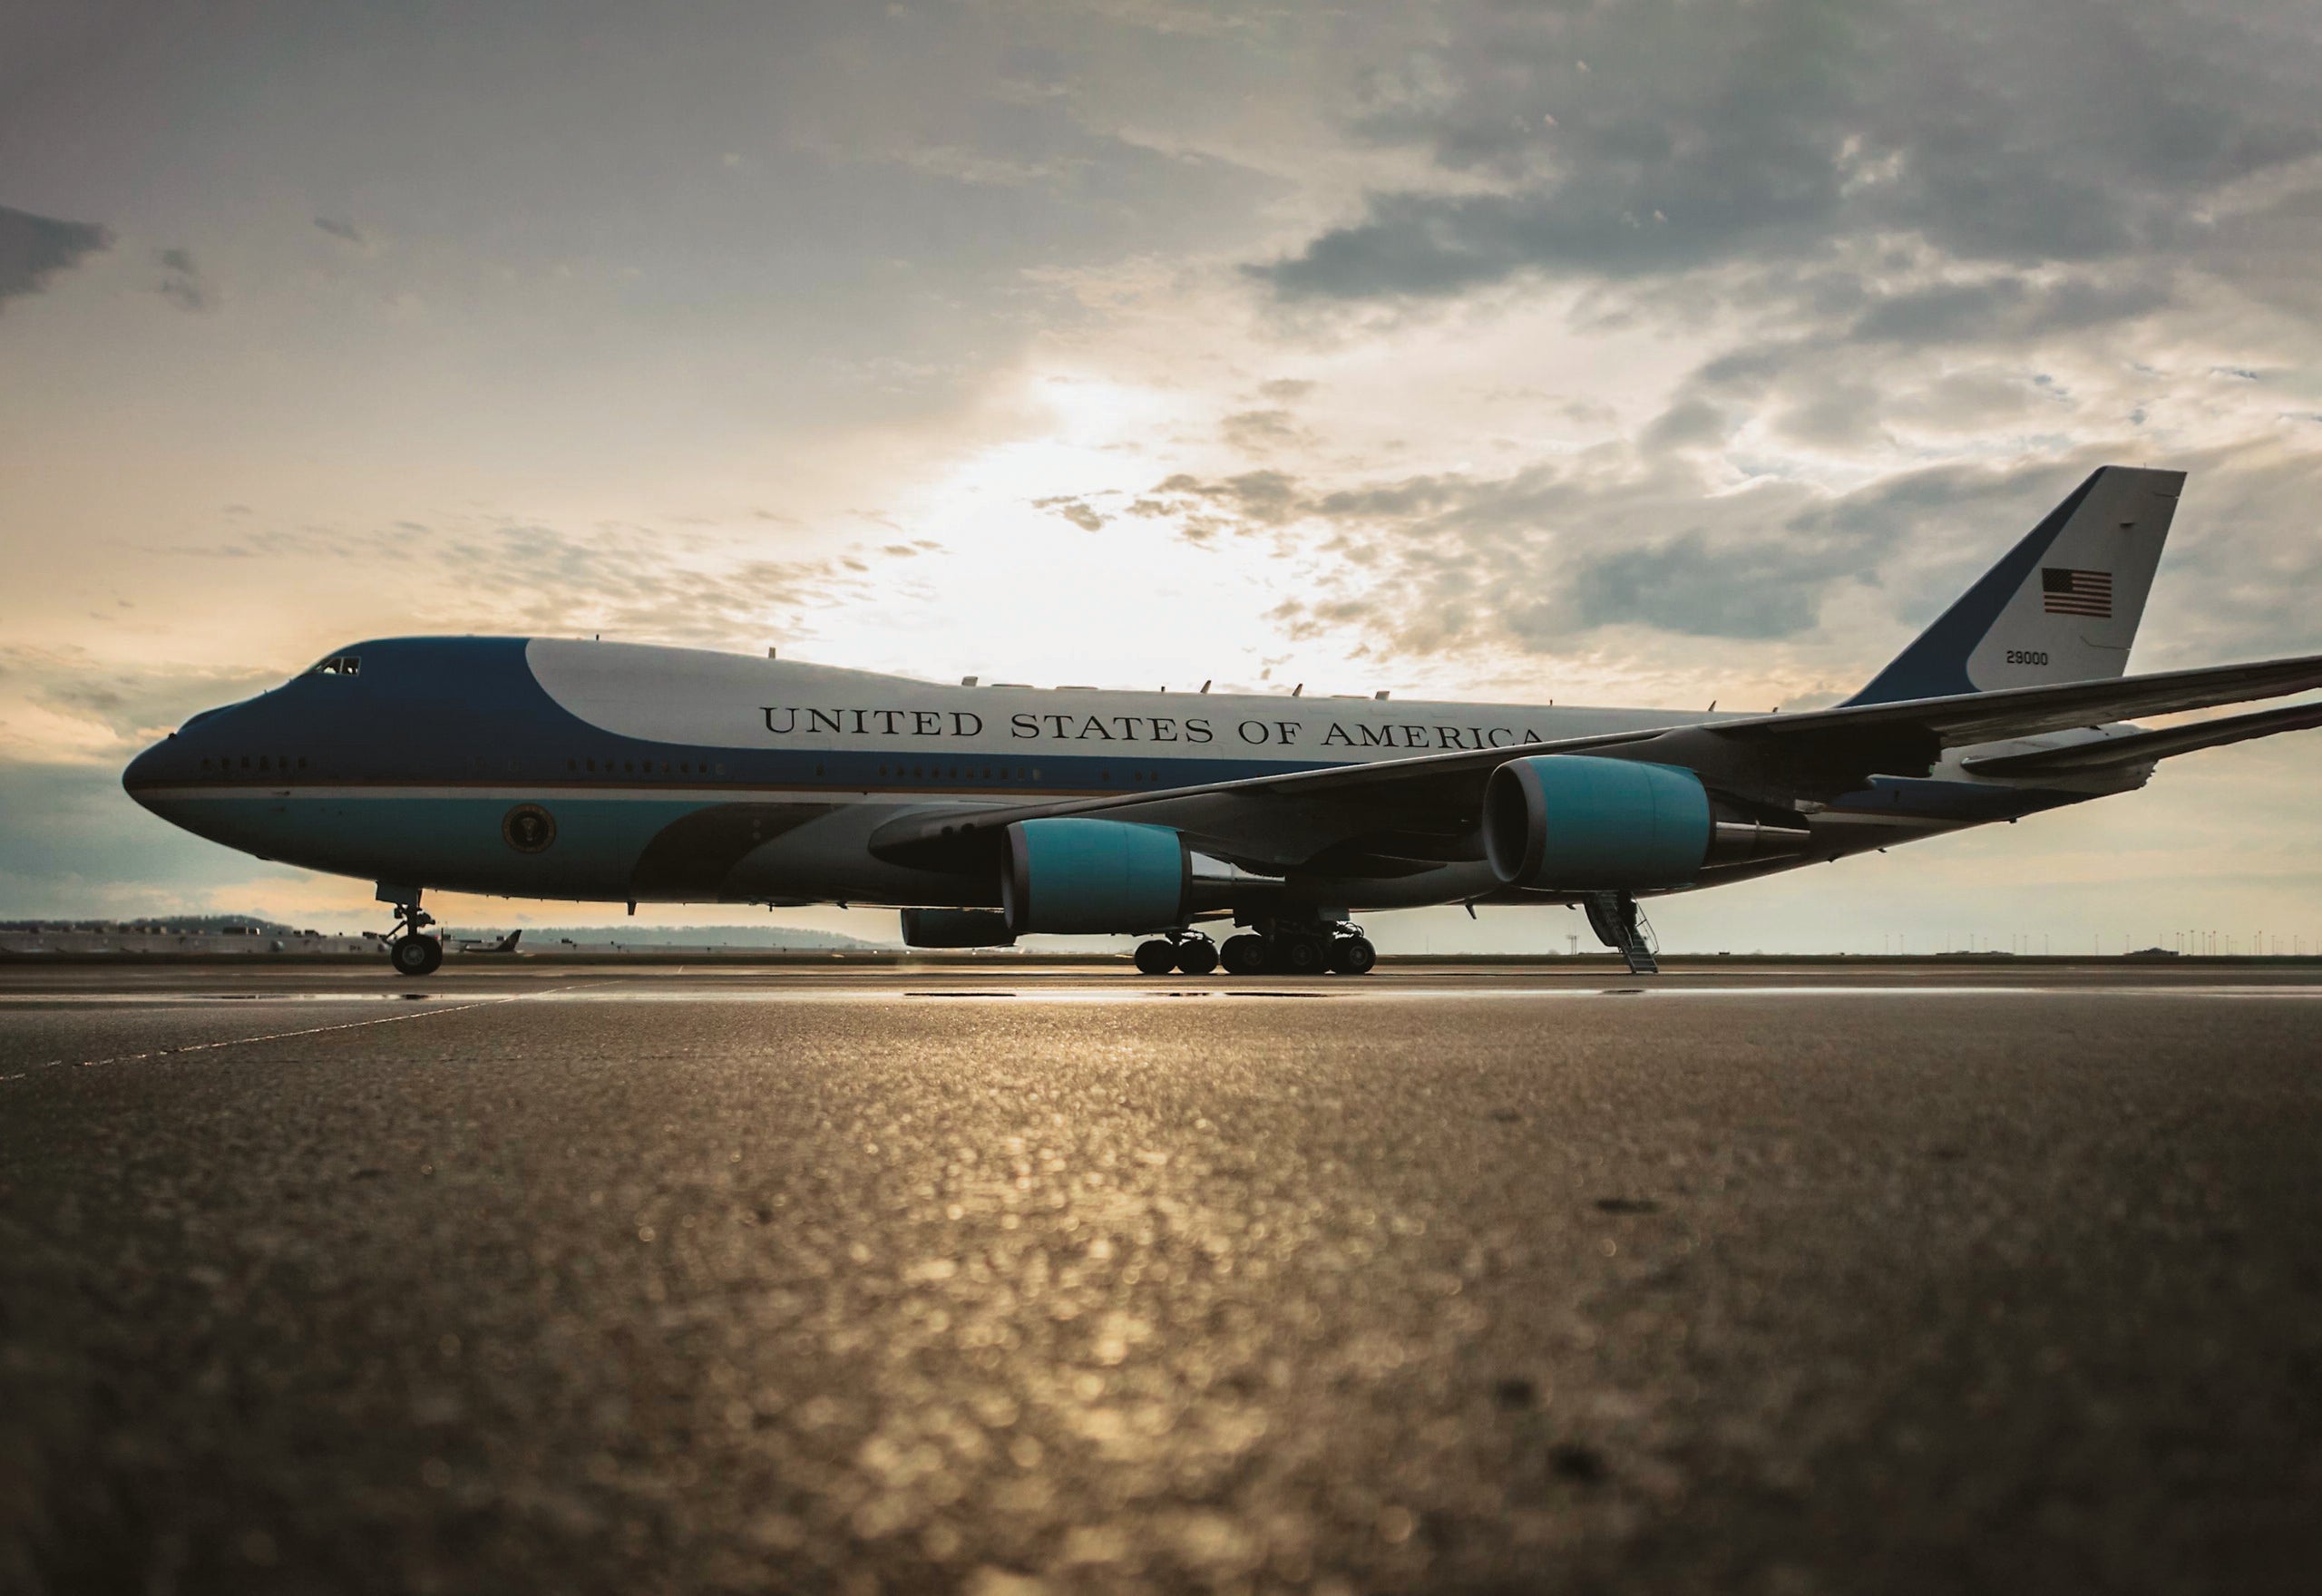 Air Force One: The Next Generation